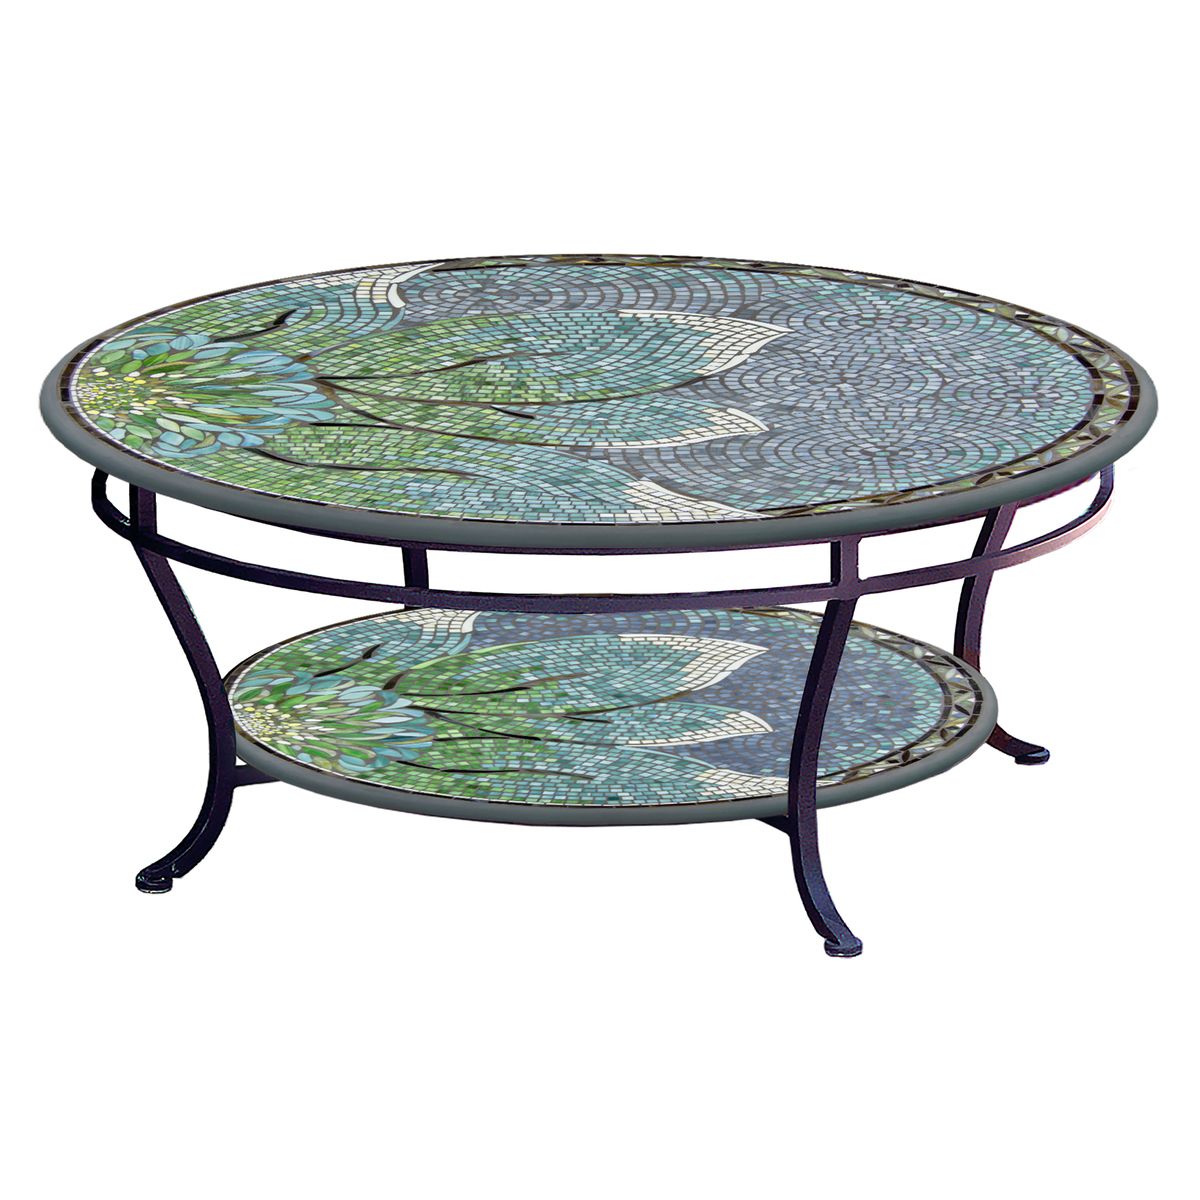 Lovina Mosaic Coffee Table - Tiered-Iron Accents